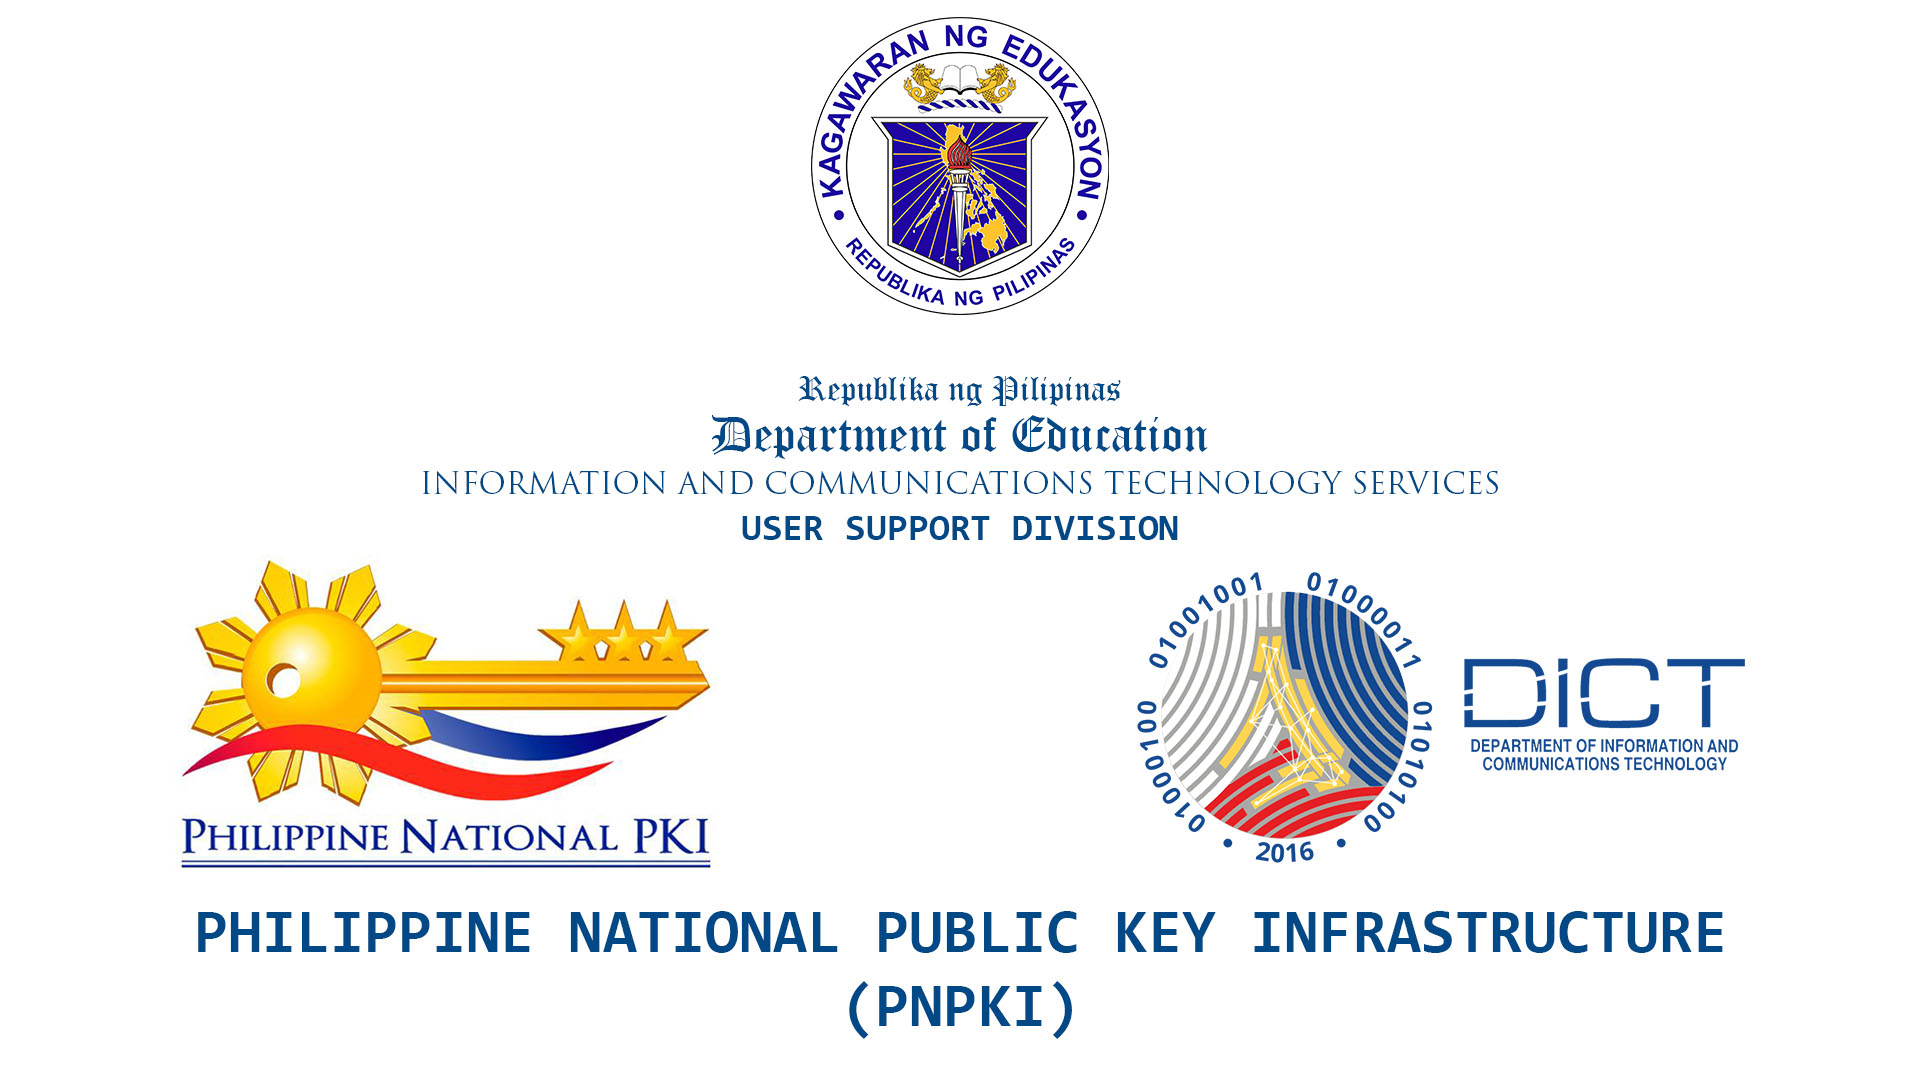 Iloilo 1st Congressional District - Facility for the Submission of the Application Requirement for the PNPKI Digital Certificate of DepEd Personnel in the Field Offices